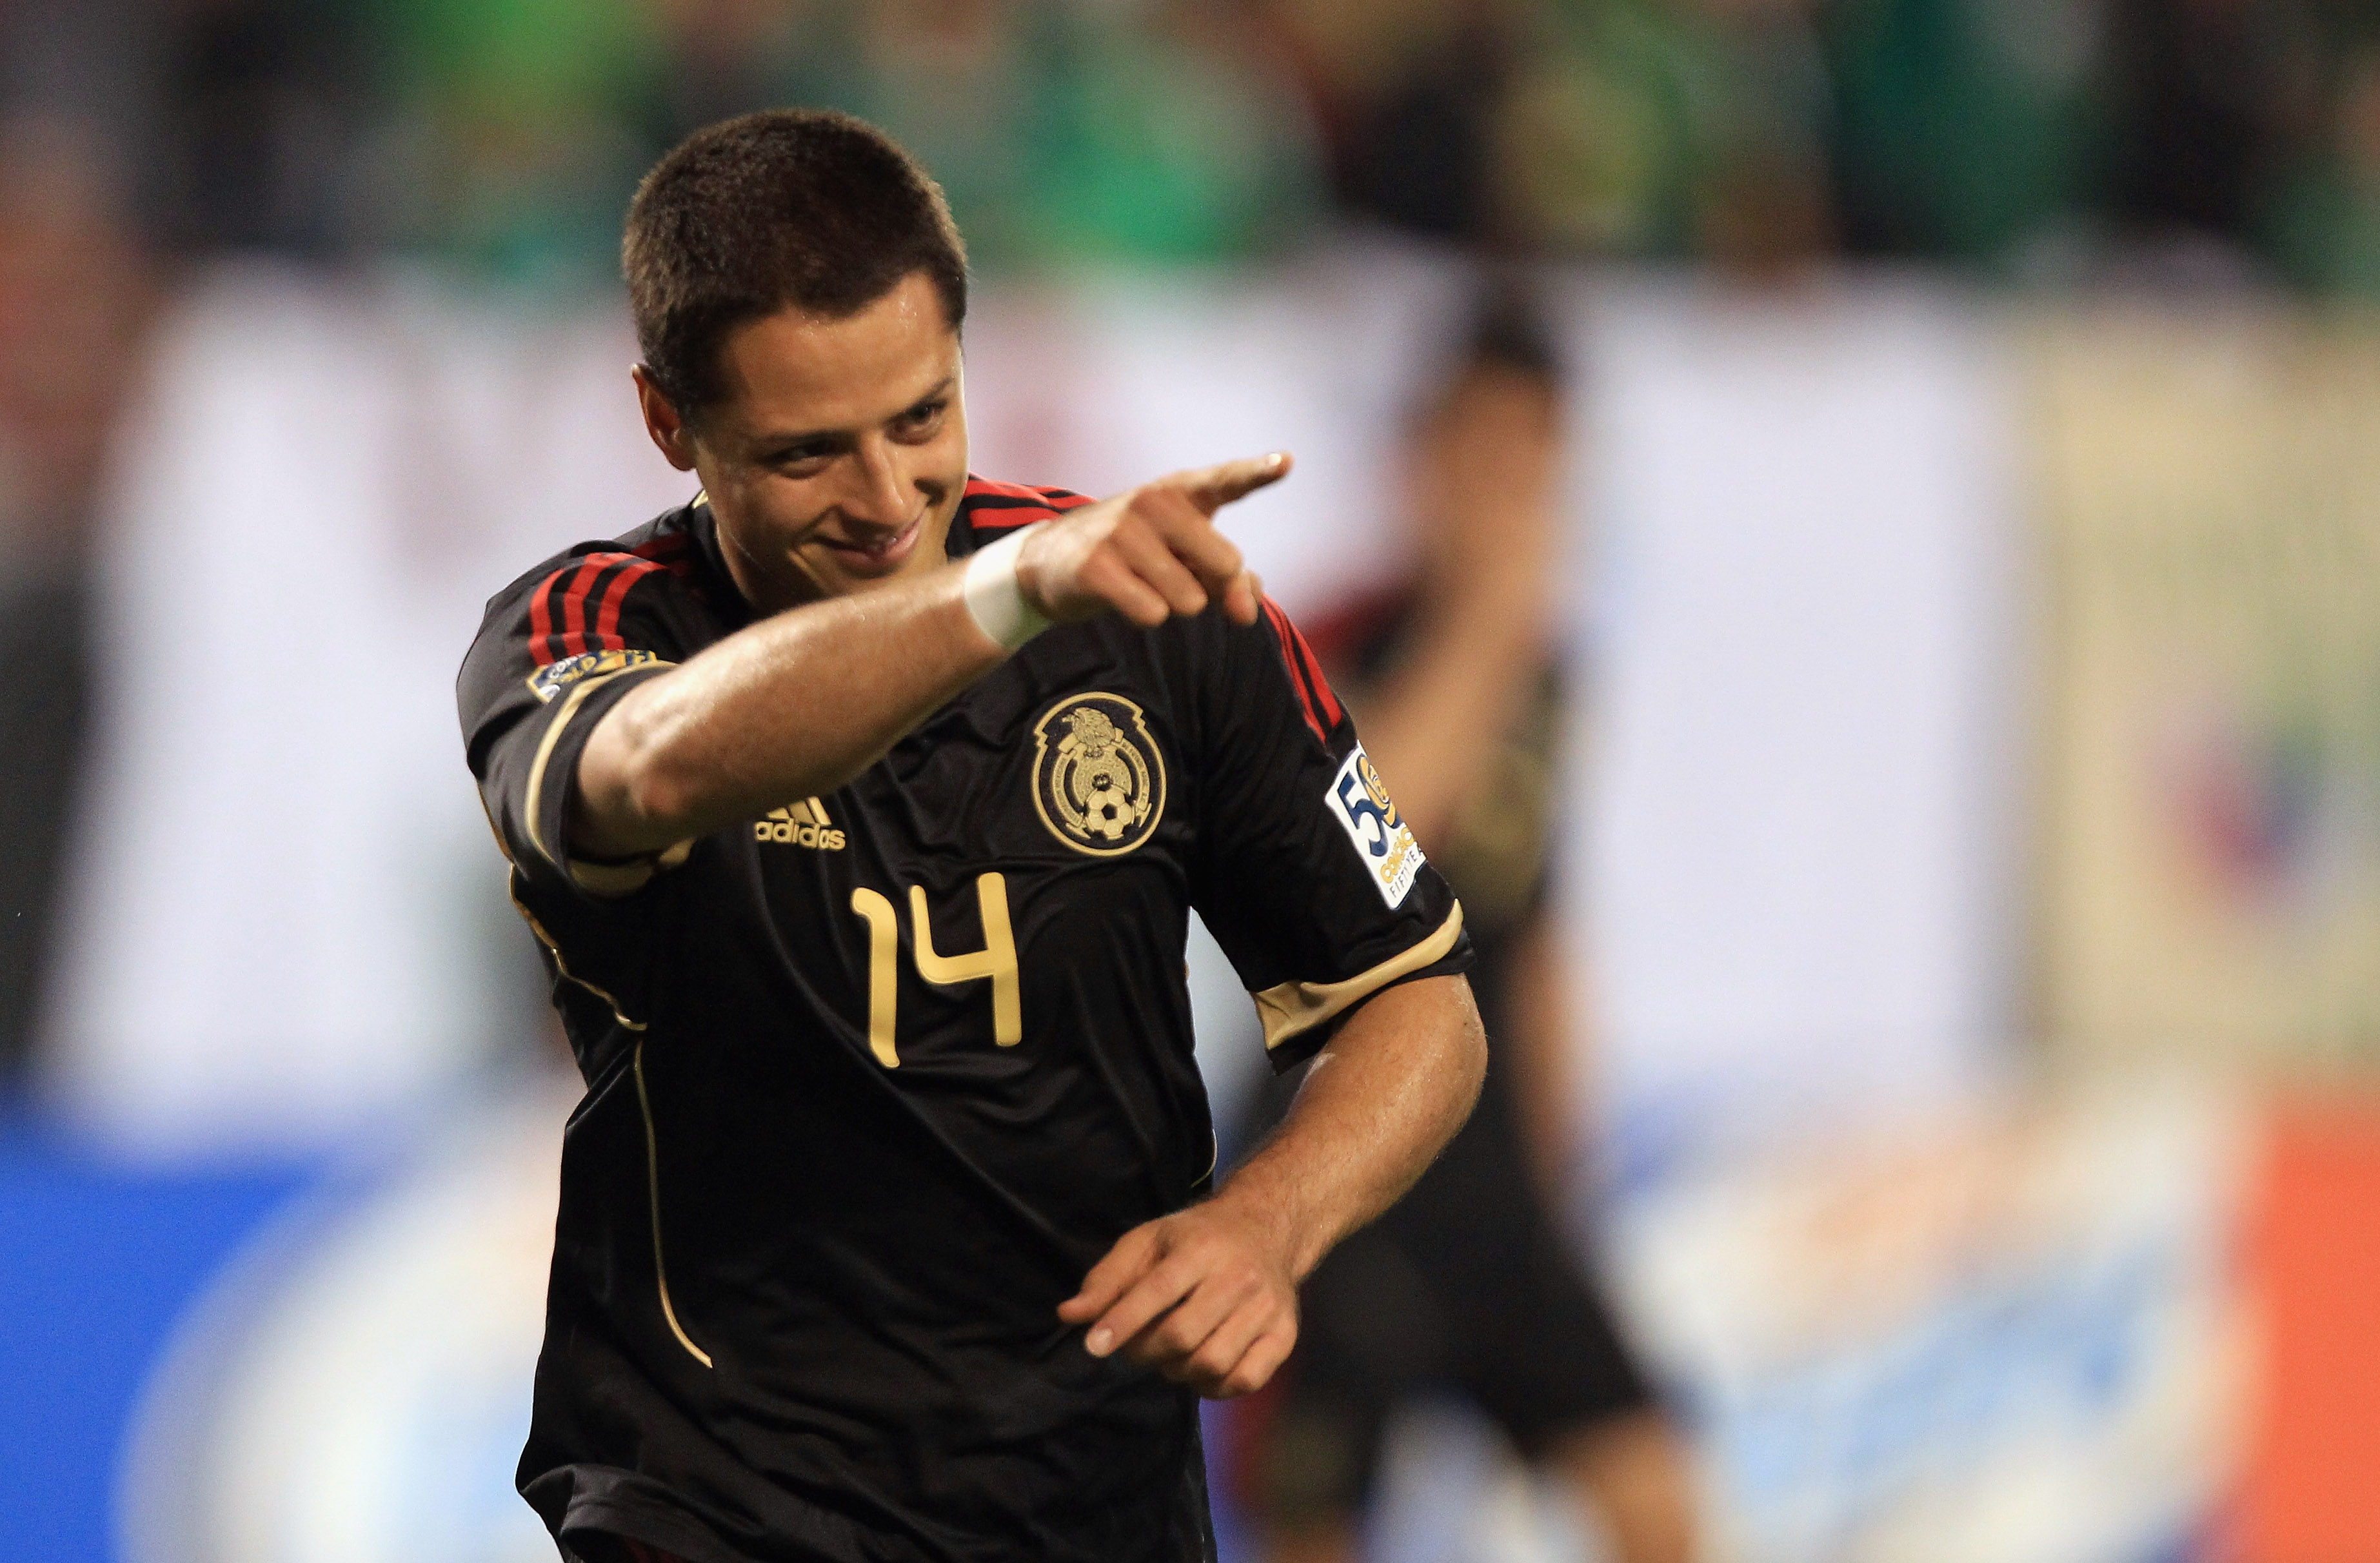 CHARLOTTE, NC - JUNE 09:  Javier Hernandez #14 of Mexico celebrates after scoring a goal against Cuba during their game in the CONCACAF Gold Cup at Bank of America Stadium on June 9, 2011 in Charlotte, North Carolina.  (Photo by Streeter Lecka/Getty Image